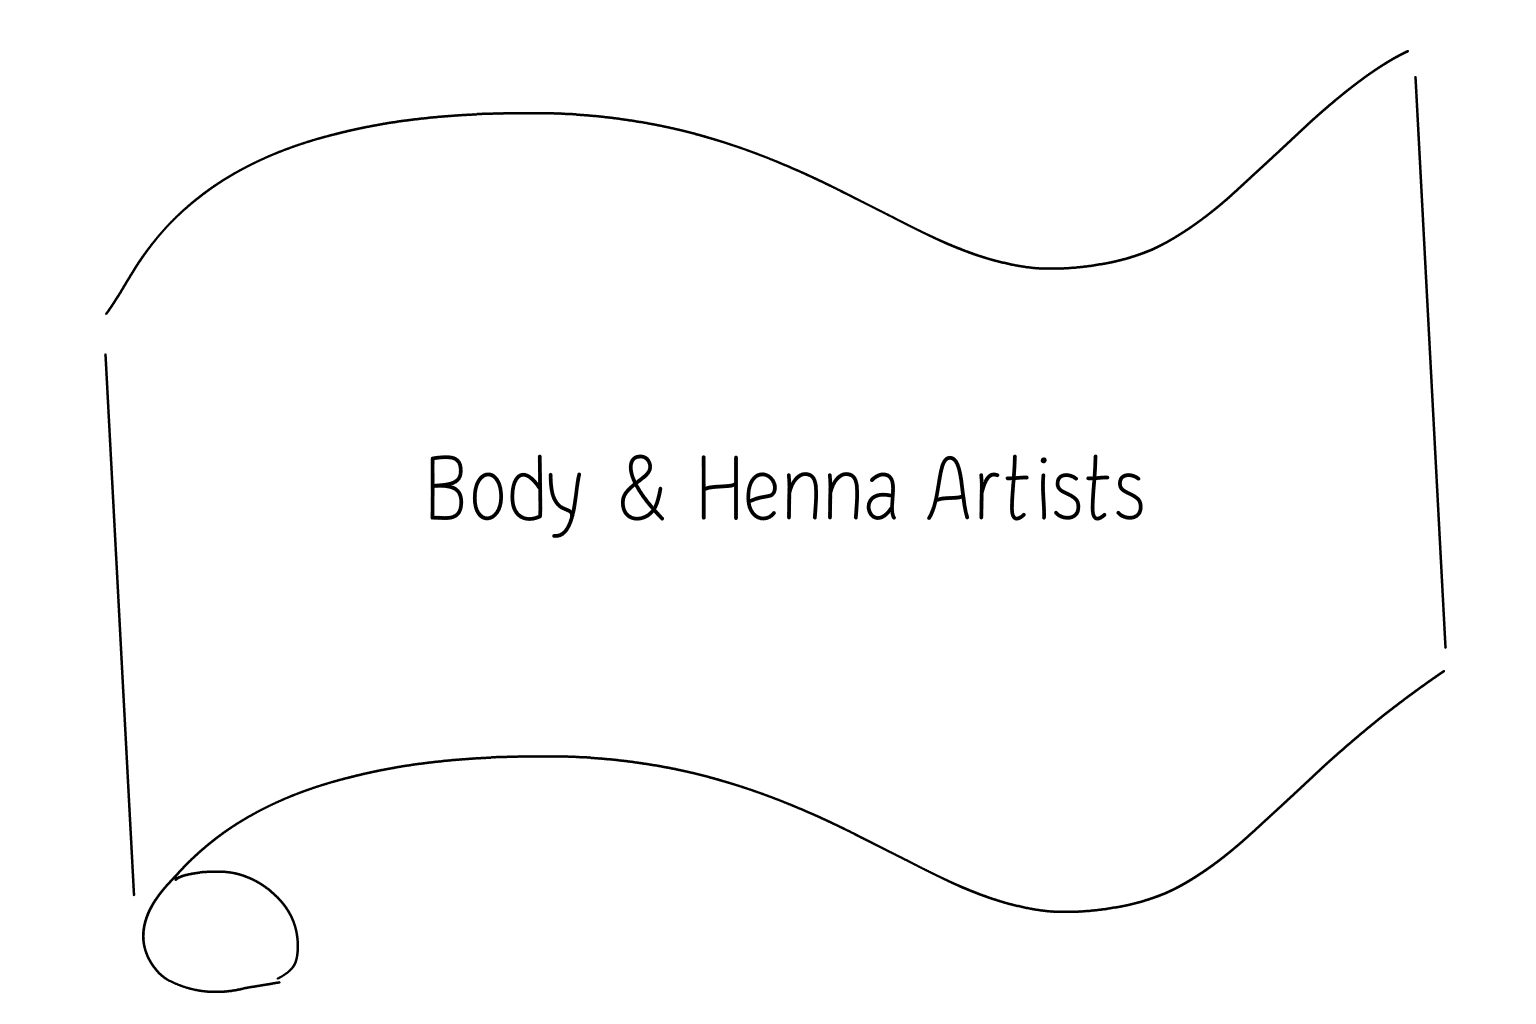 Illustration of Body and Henna Artists